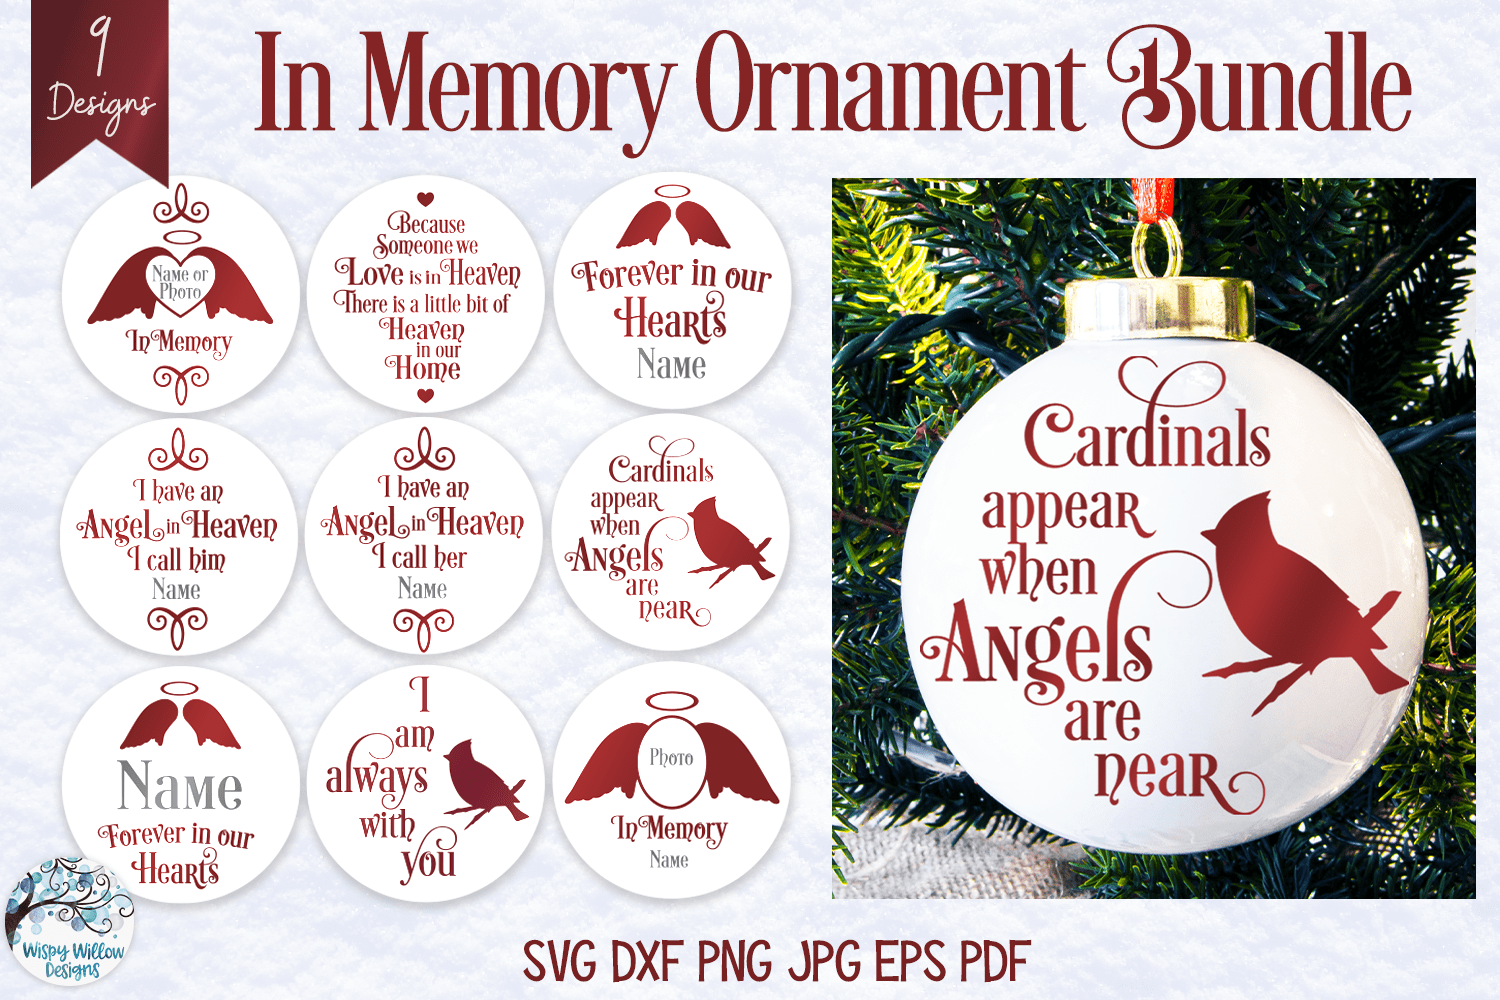 In Memory Round Ornament SVG Bundle | Christmas SVGs Wispy Willow Designs Company